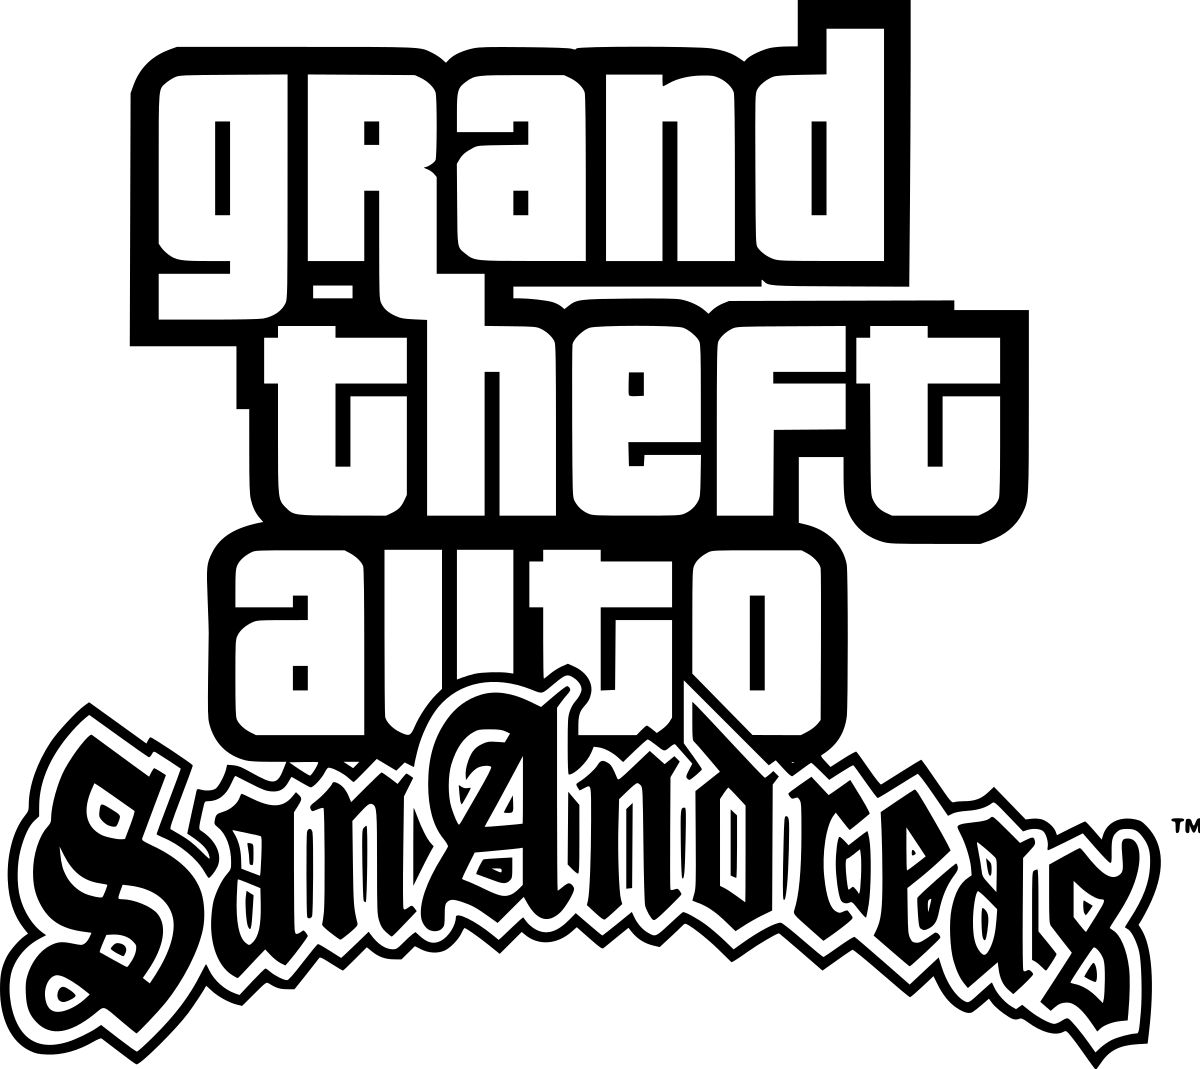 How To Download GTA San Andreas For PC Windows 10 For FREE?